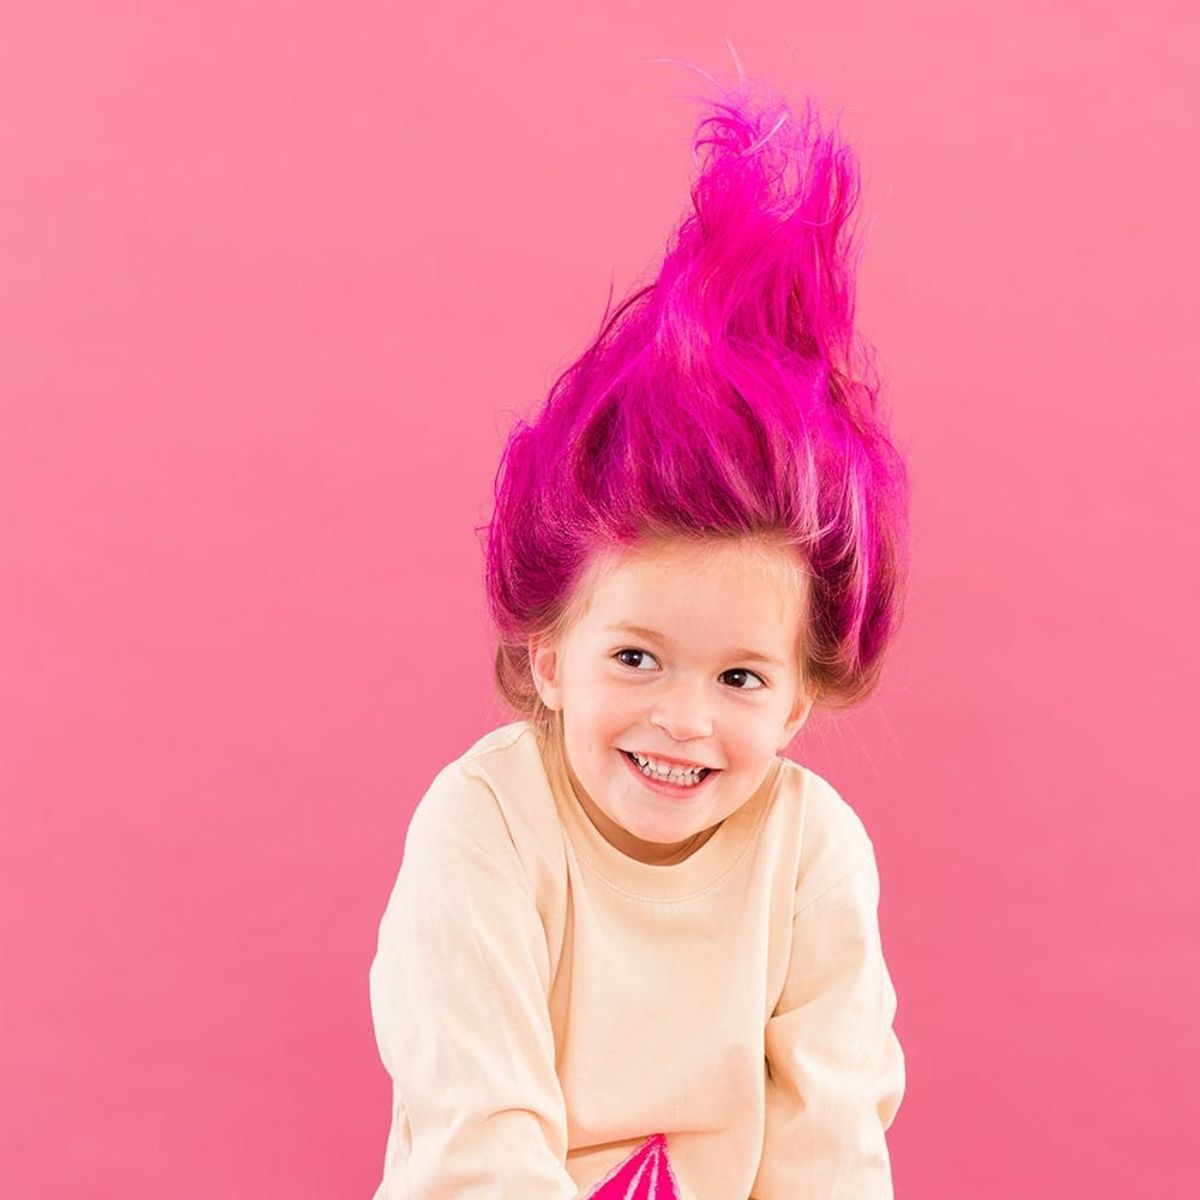 11 DIY Halloween Hairstyles for You and Your Kiddos